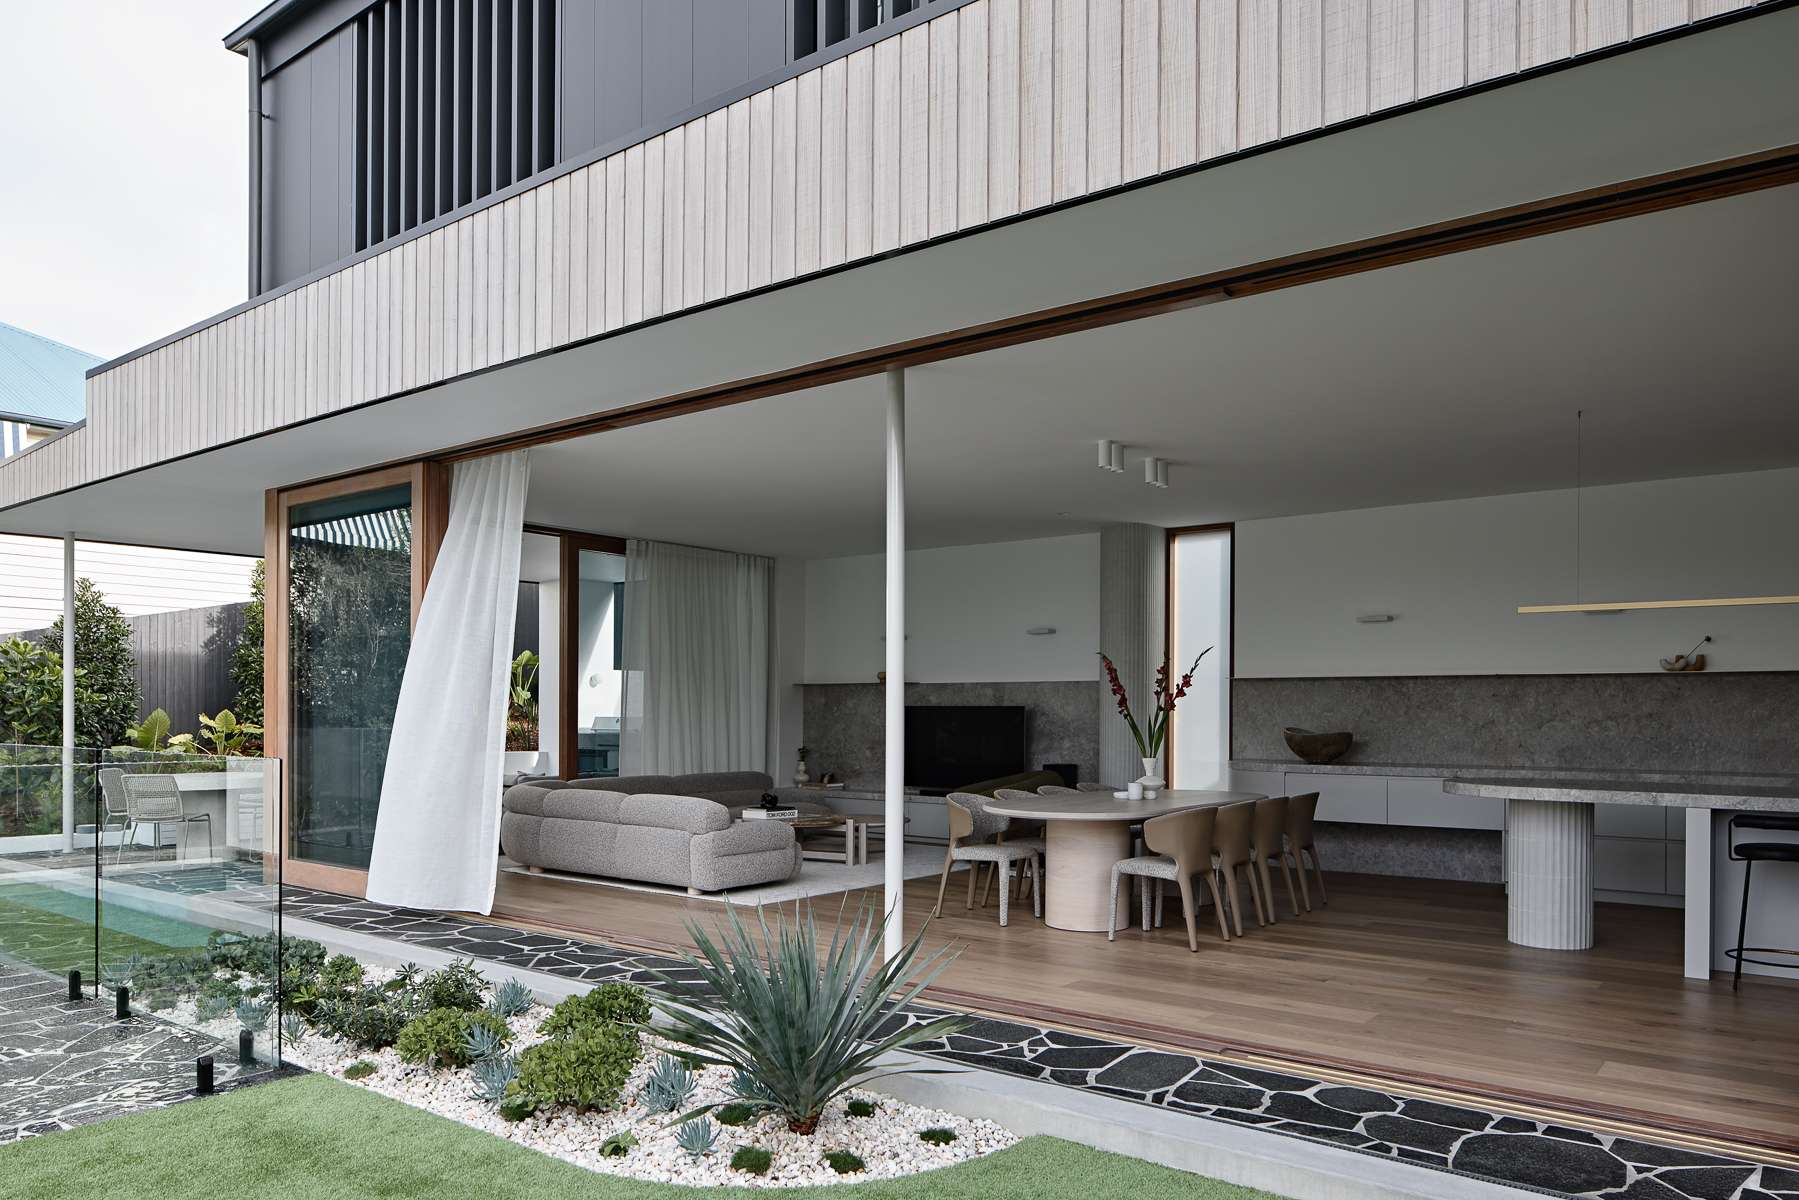 Amiri Courtyard House by Kelder Architects showing the open plan living area opening out to the courtyard